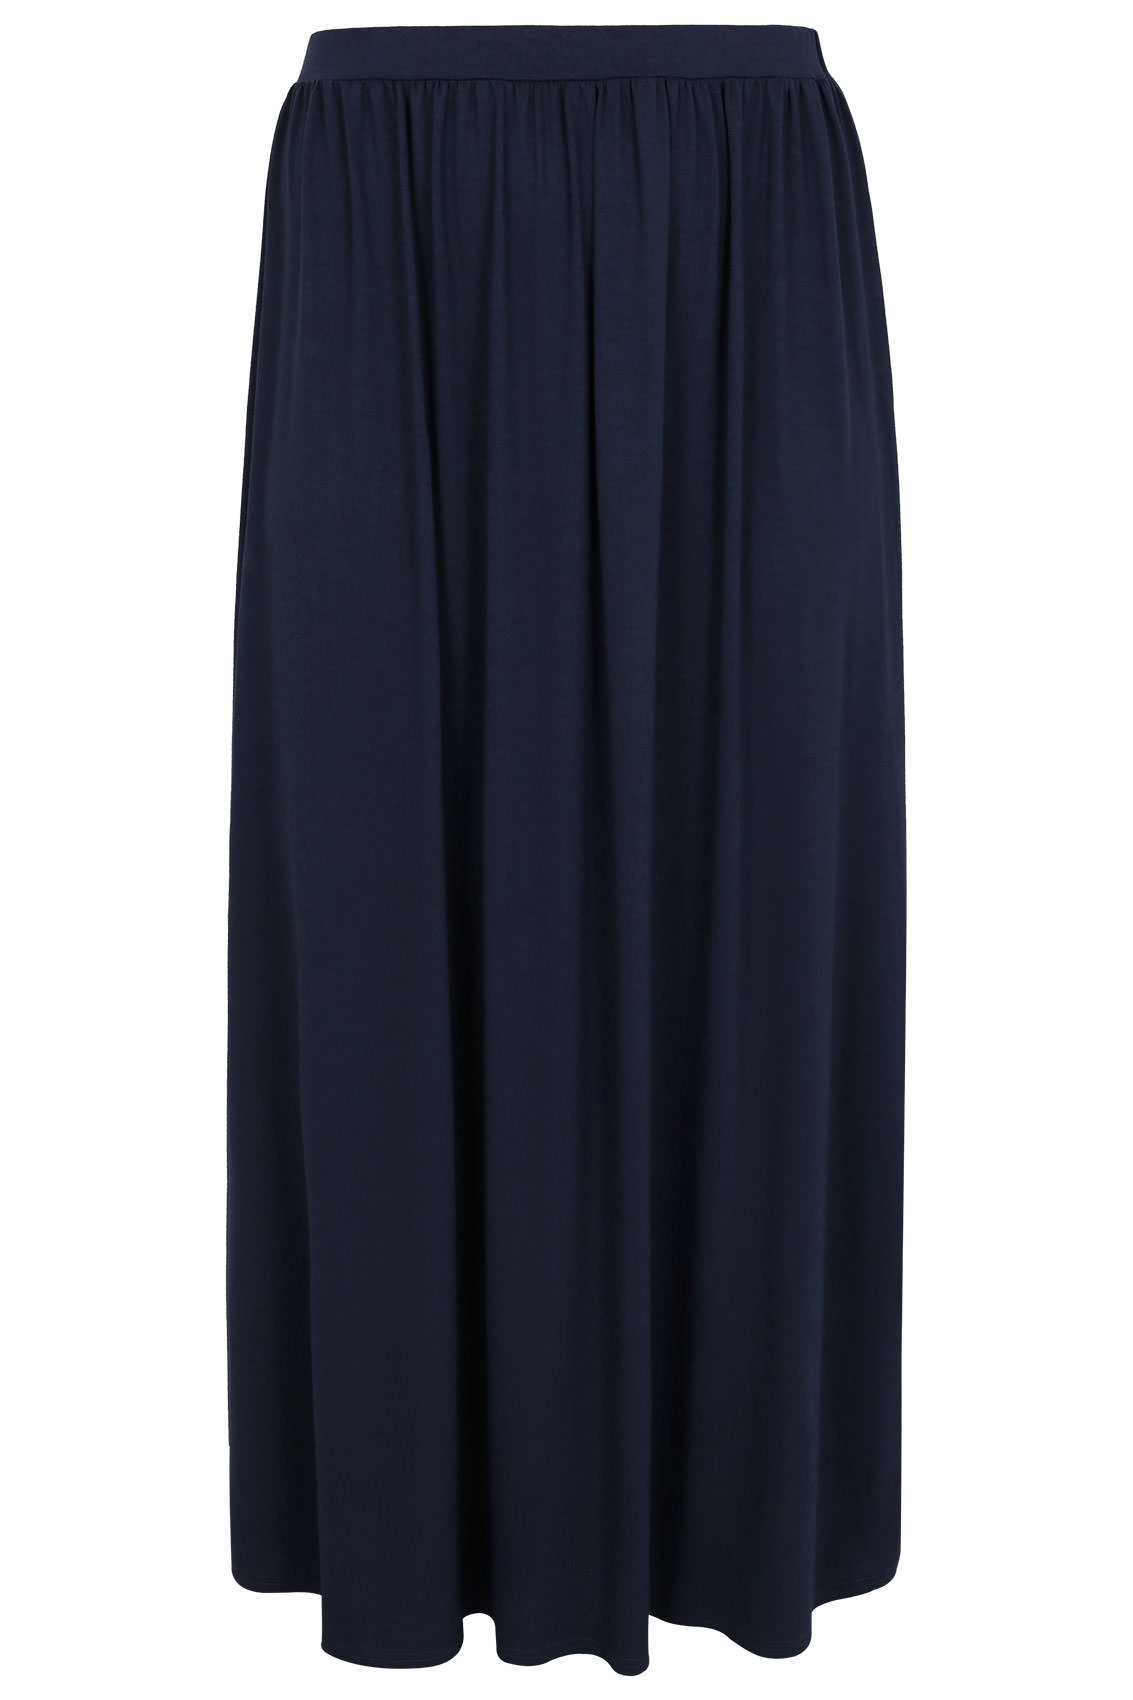 Navy Jersey Maxi Skirt, Plus size 16 to 36